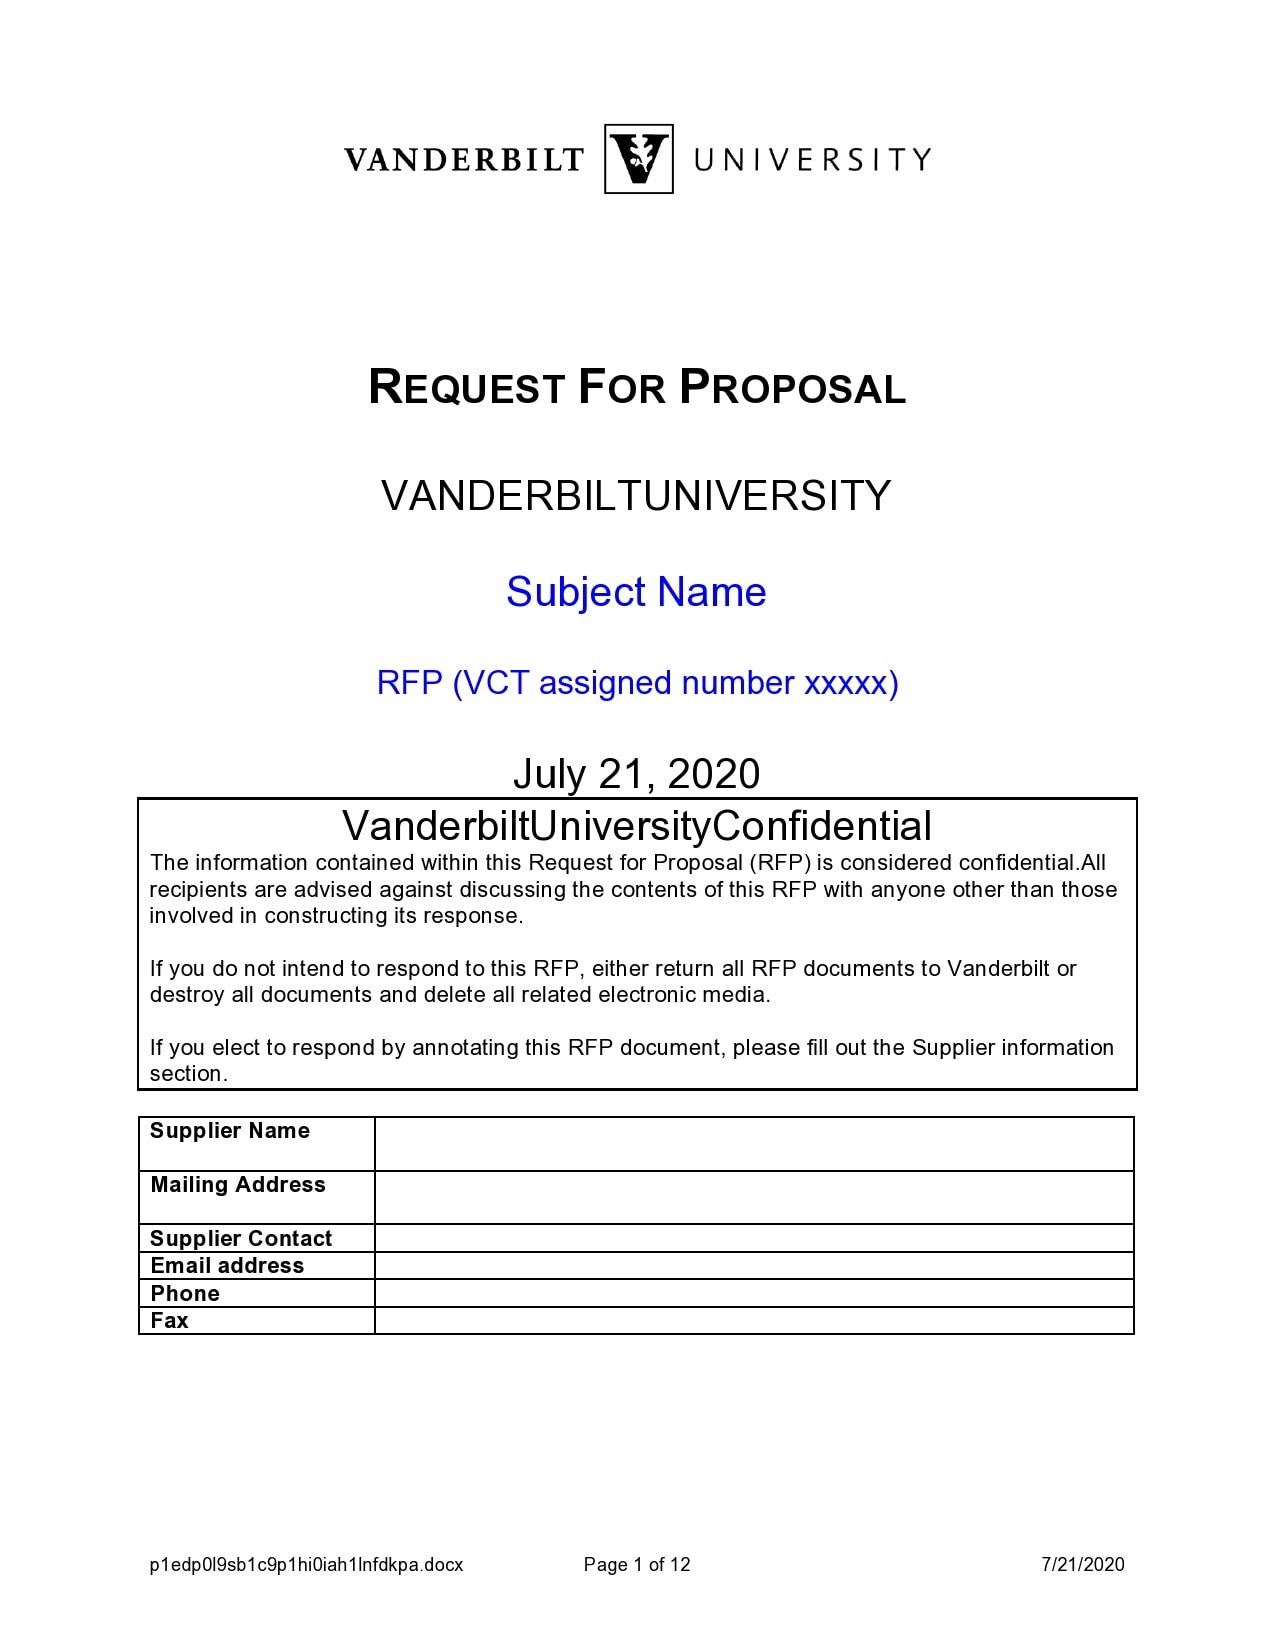 28 Best Request For Proposal Templates (RFP) TemplateArchive